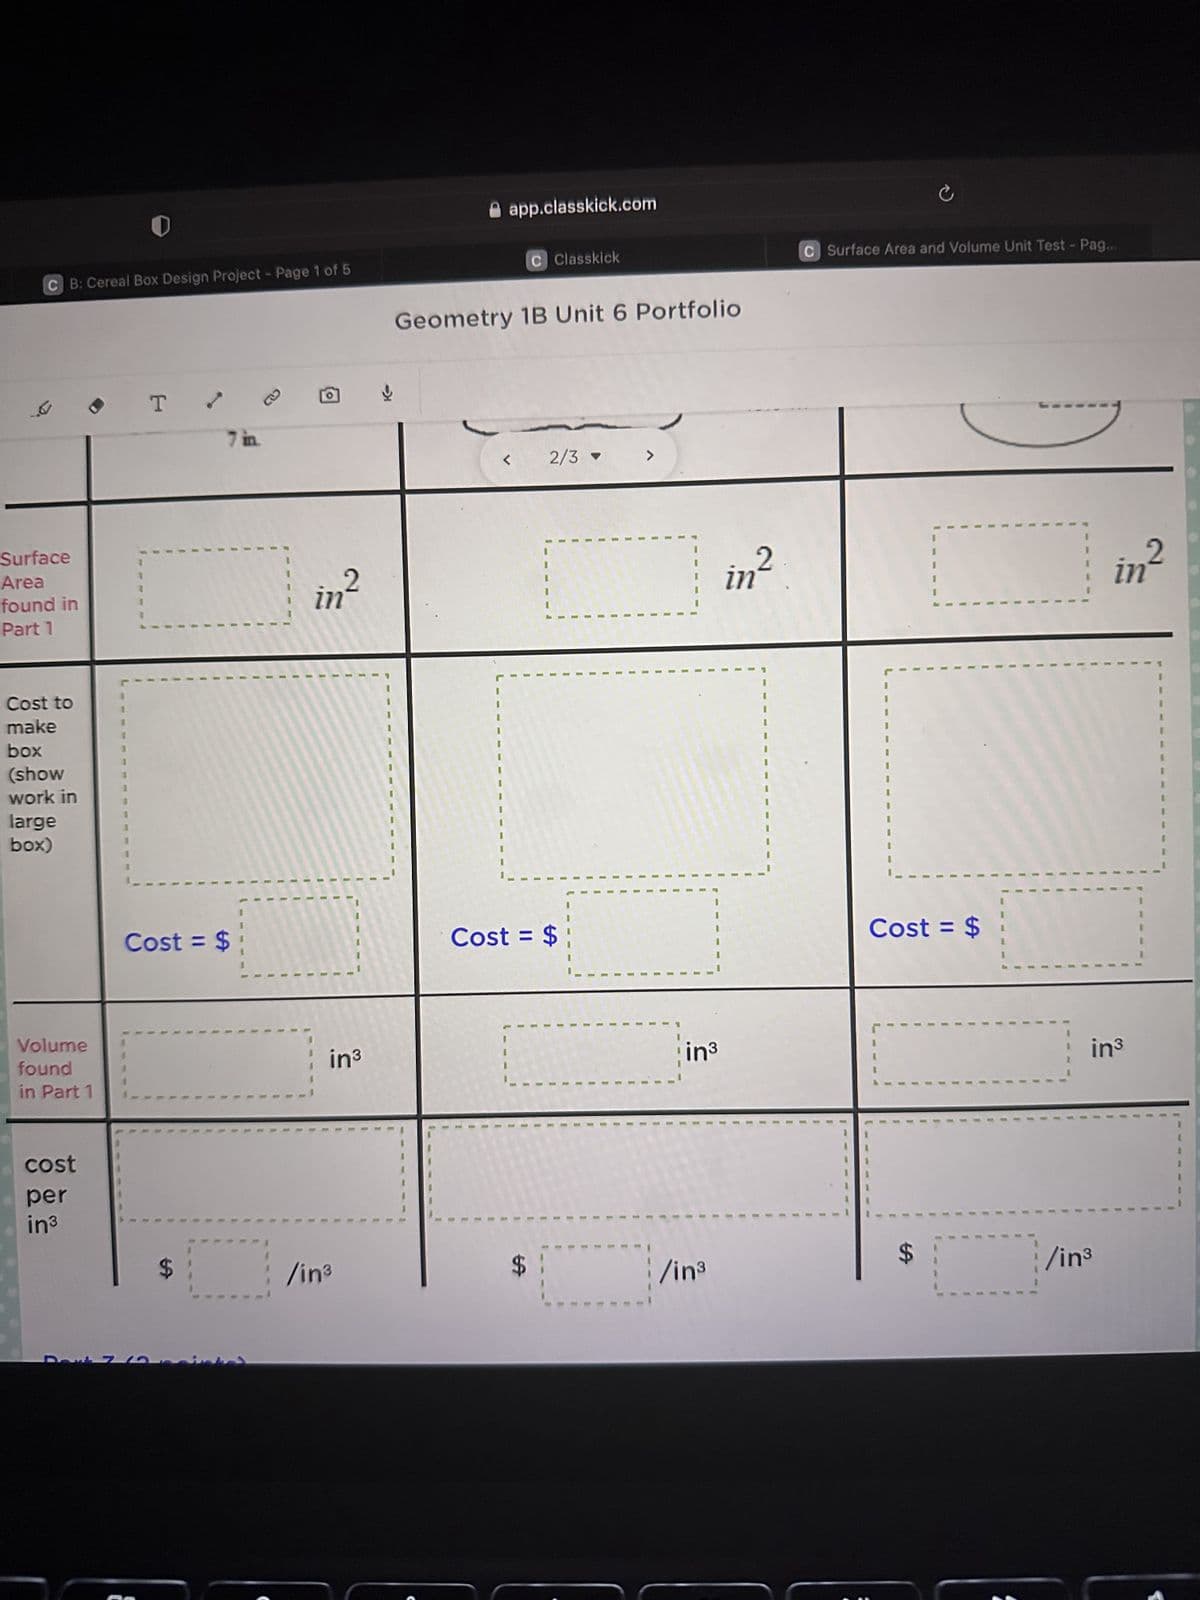 CB: Cereal Box Design Project - Page 1 of 5
Surface
Area
found in
Part 1
Cost to
make
box
(show
work in
large
box)
Volume
found
in Part 1
cost
per
in³
1
1
T
7 in.
Cost = $
a
in²
¦ in³
/in³
ત્ર
app.classkick.com
C Classkick
Geometry 1B Unit 6 Portfolio
69
Cost = $
2/3 -
$
>
in³
/in³
in²
C
C Surface Area and Volume Unit Test - Pag...
Cost = $
$
-
in²
in³
/in³
t
1
1
1